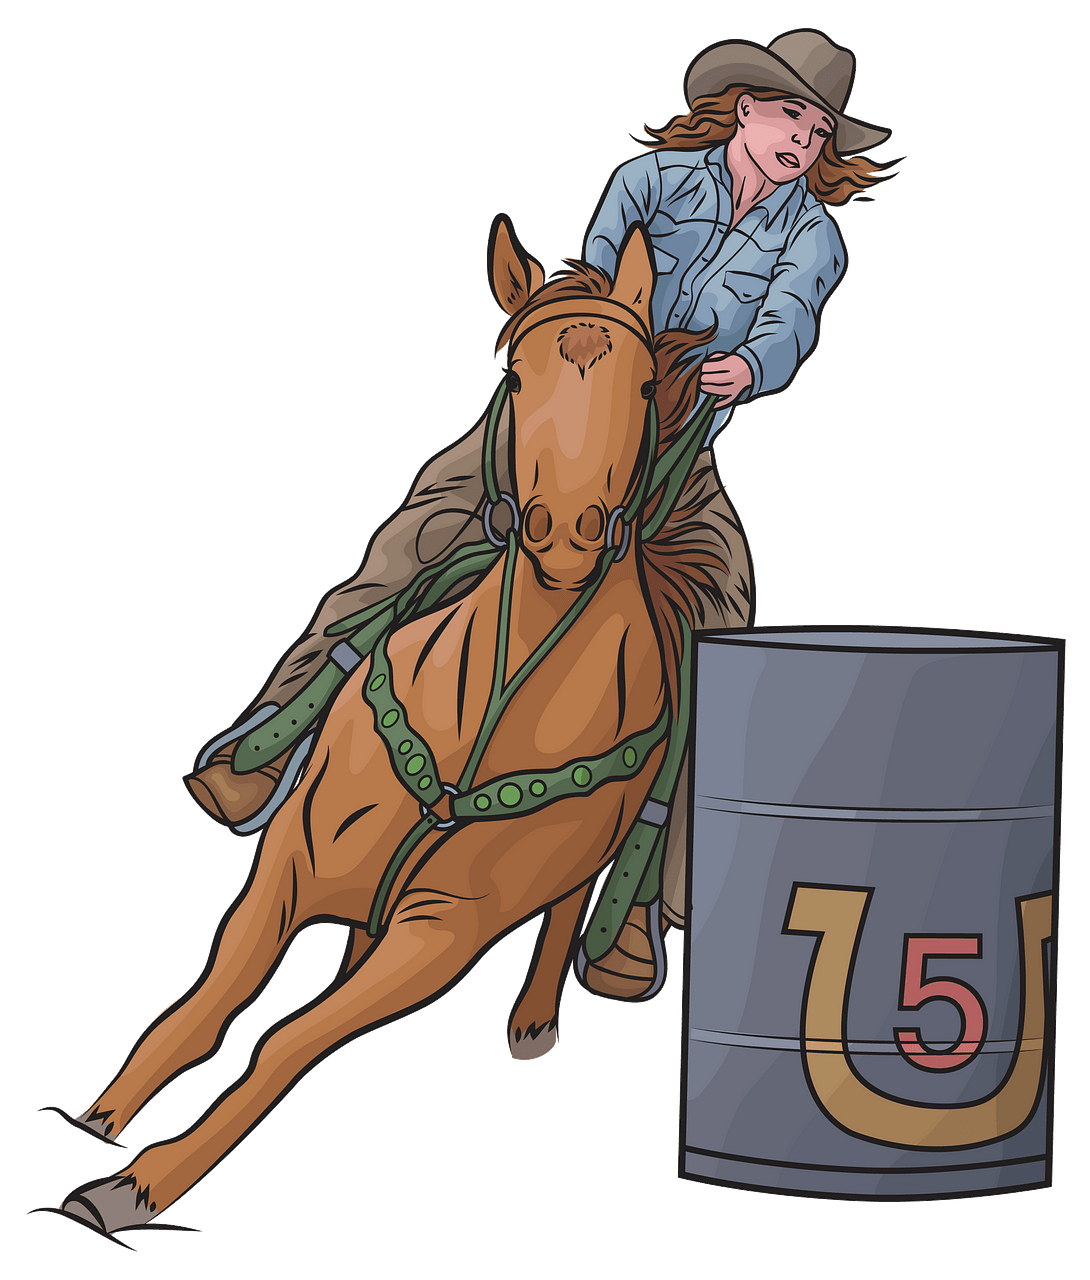 Clip Arts Related To : horse barrel racing drawing. 